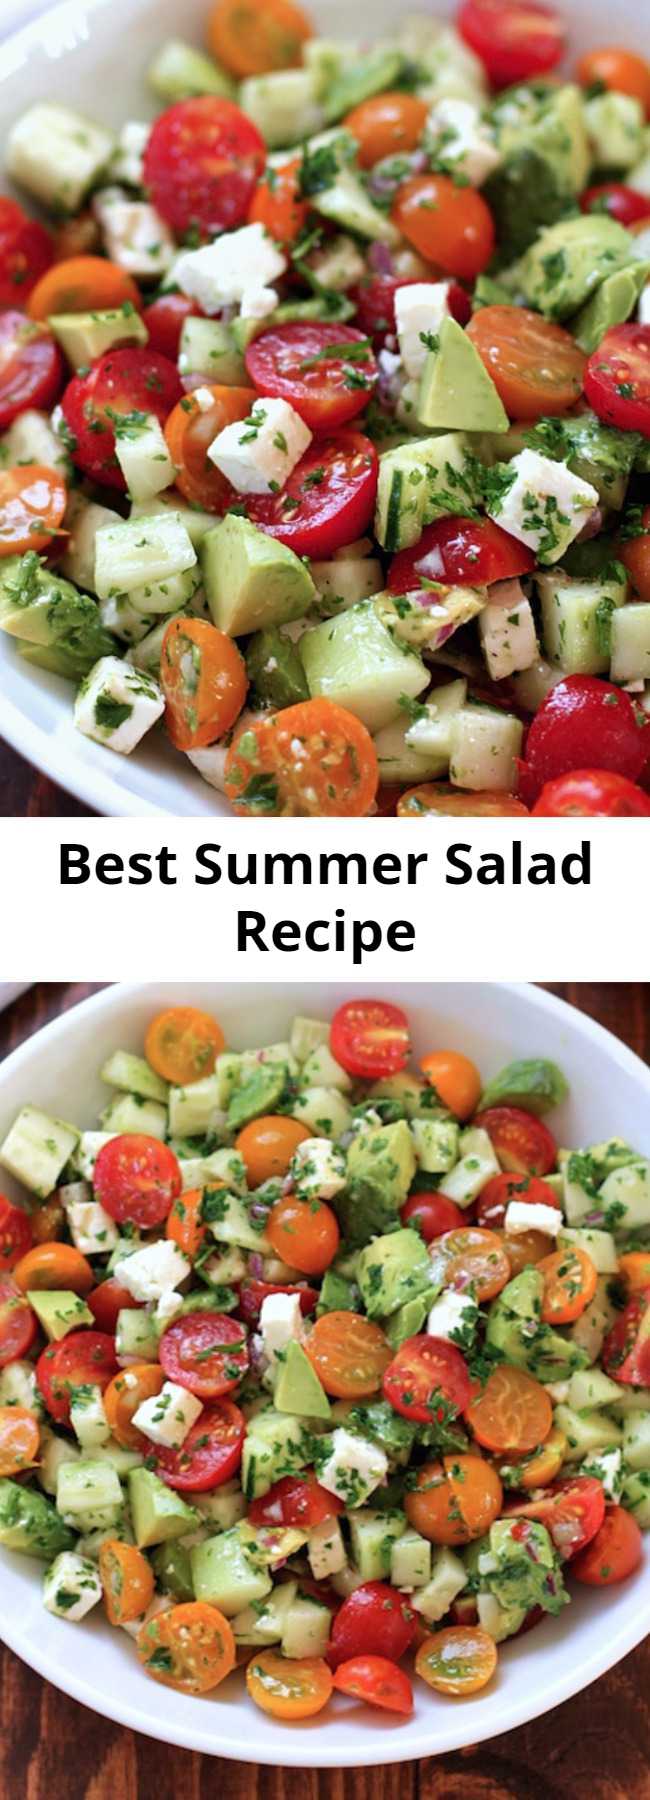 Best Summer Salad Recipe - This tomato, cucumber, avocado salad is an easy, healthy, flavorful summer salad.  It’s crunchy, fresh and simple to make.  It’s a family favorite and ready in less than 15 minutes.